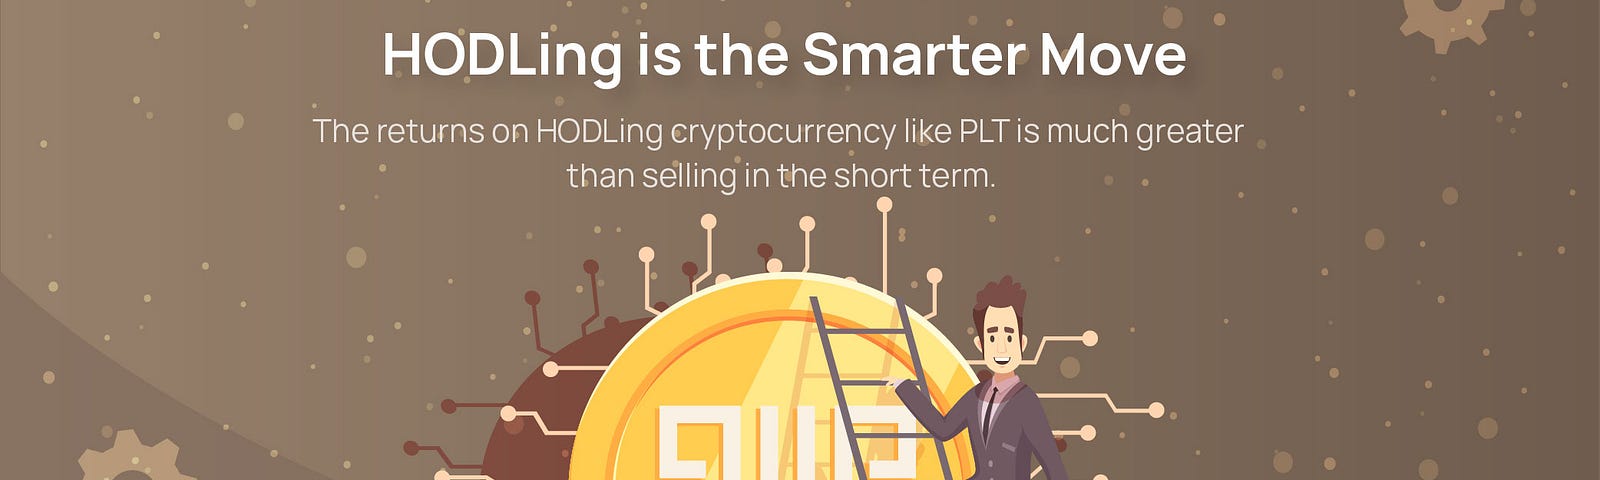 HODLing is the Smarter Move, Plutus Capital